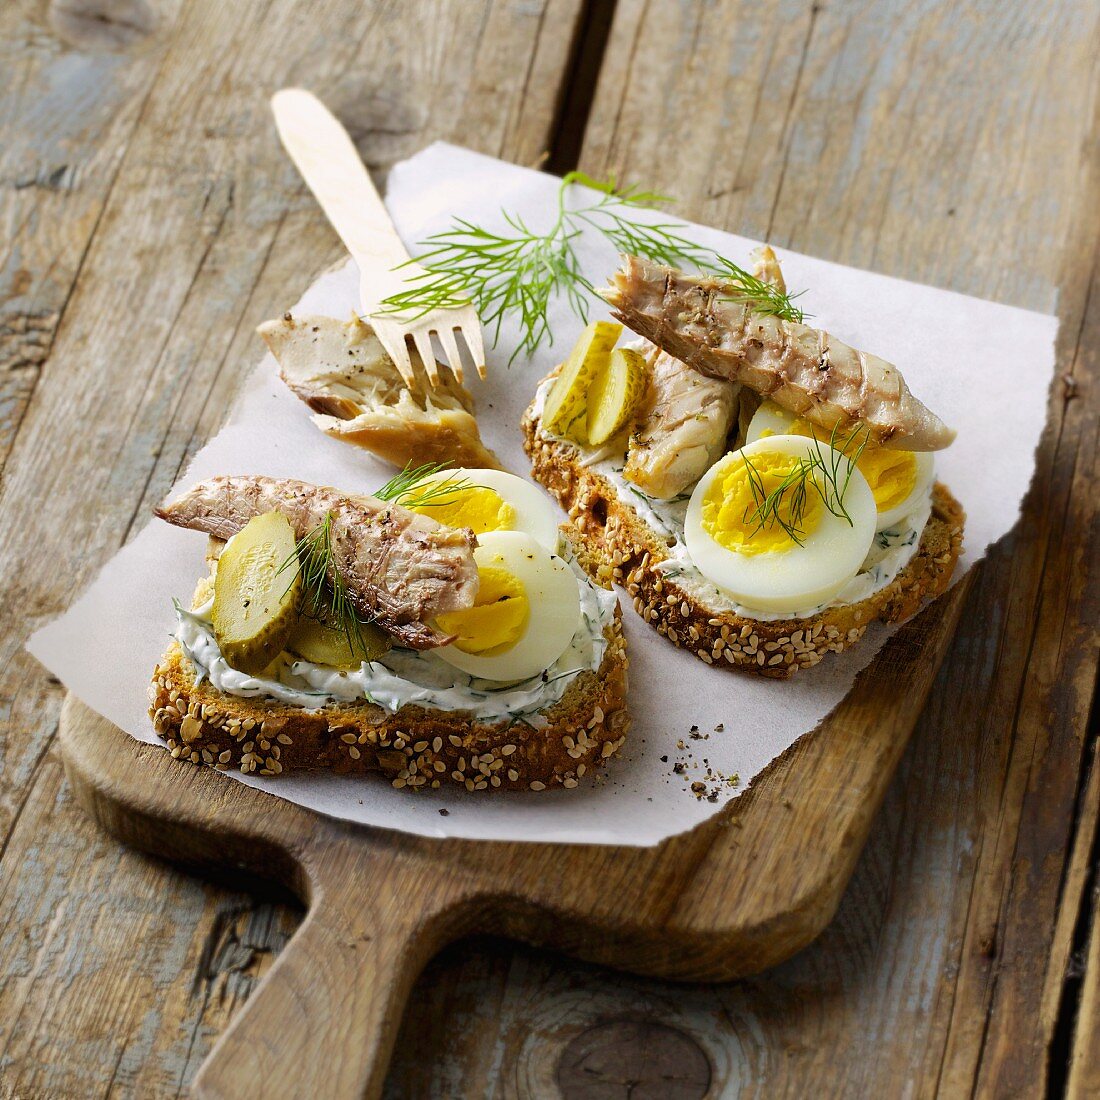 Slices of bread topped with mackerel, hard-boiled eggs and gherkins